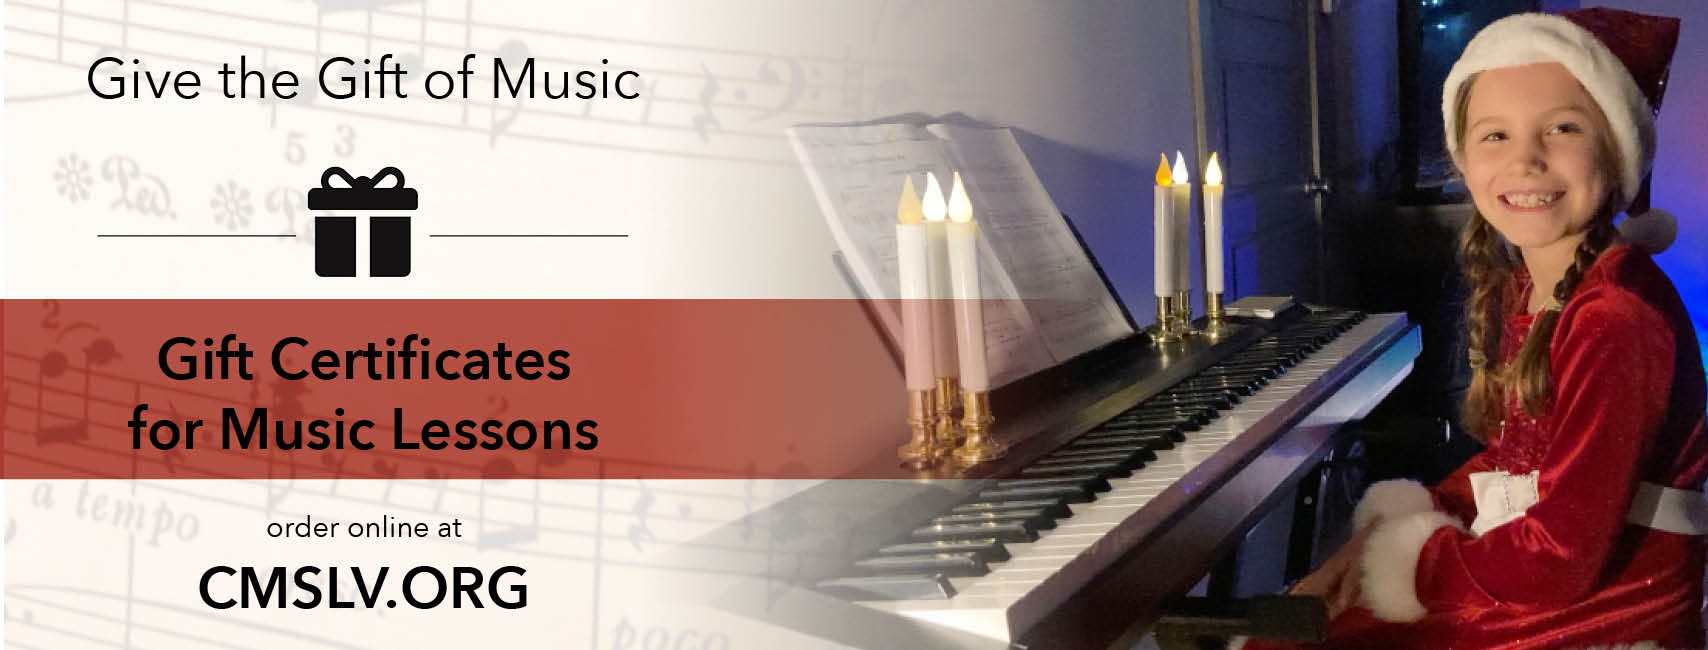 Gift Certificates for music lessons at Community Music School